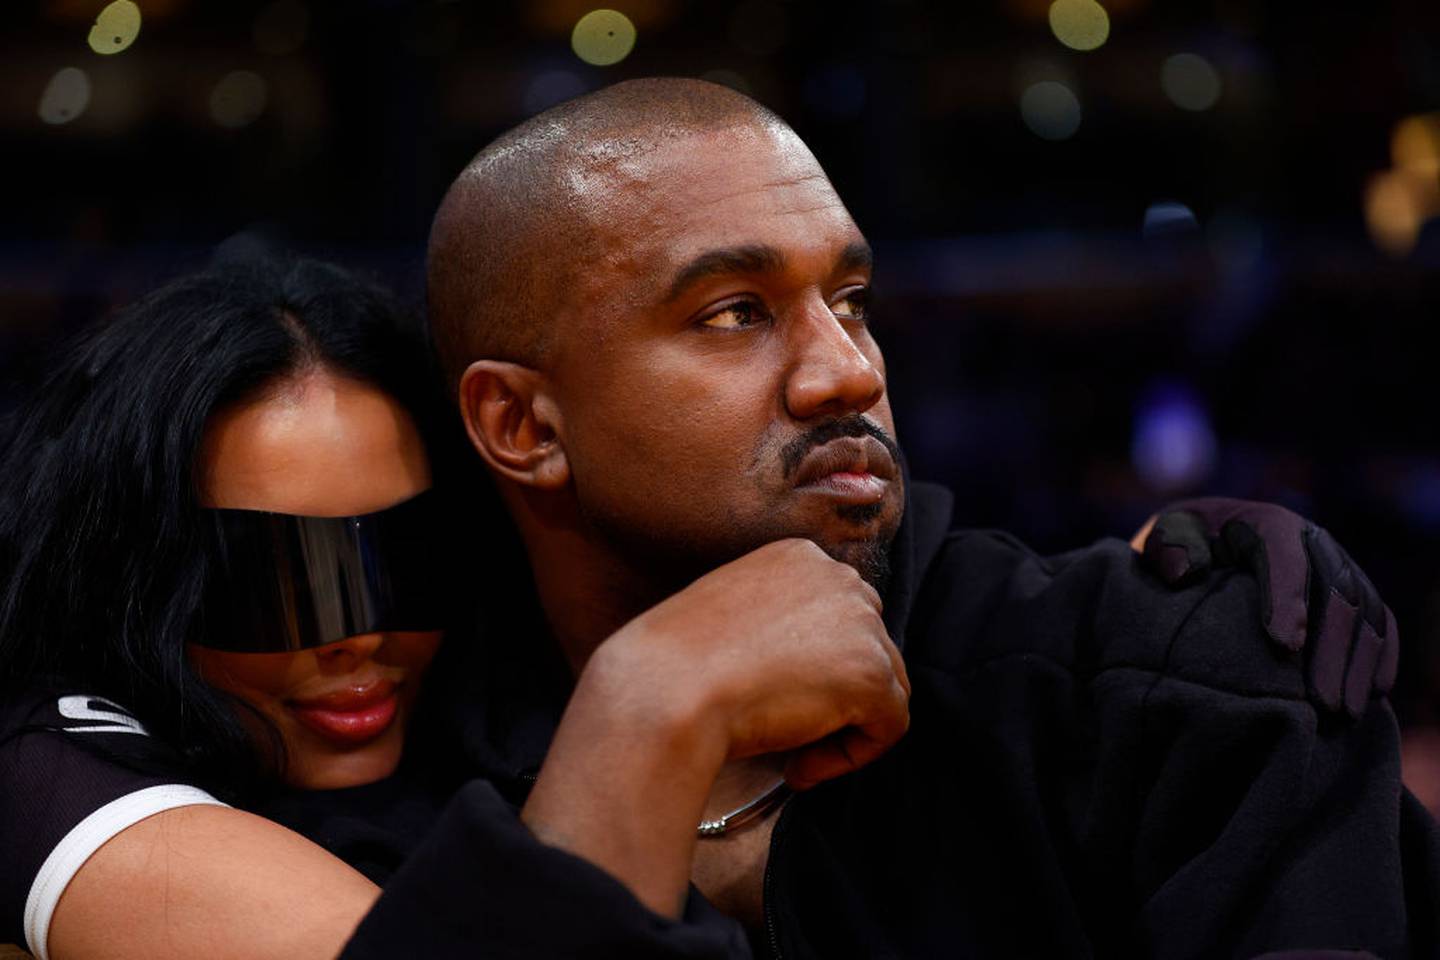 LOS ANGELES, CALIFORNIA - MARCH 11:  Rapper Kanye West and girlfriend Chaney Jones attend a game between the Washington Wizards and the Los Angeles Lakers in the fourth quarter at Crypto.com Arena on March 11, 2022 in Los Angeles, California.  NOTE TO USER: User expressly acknowledges and agrees that, by downloading and/or using this Photograph, user is consenting to the terms and conditions of the Getty Images License Agreement.